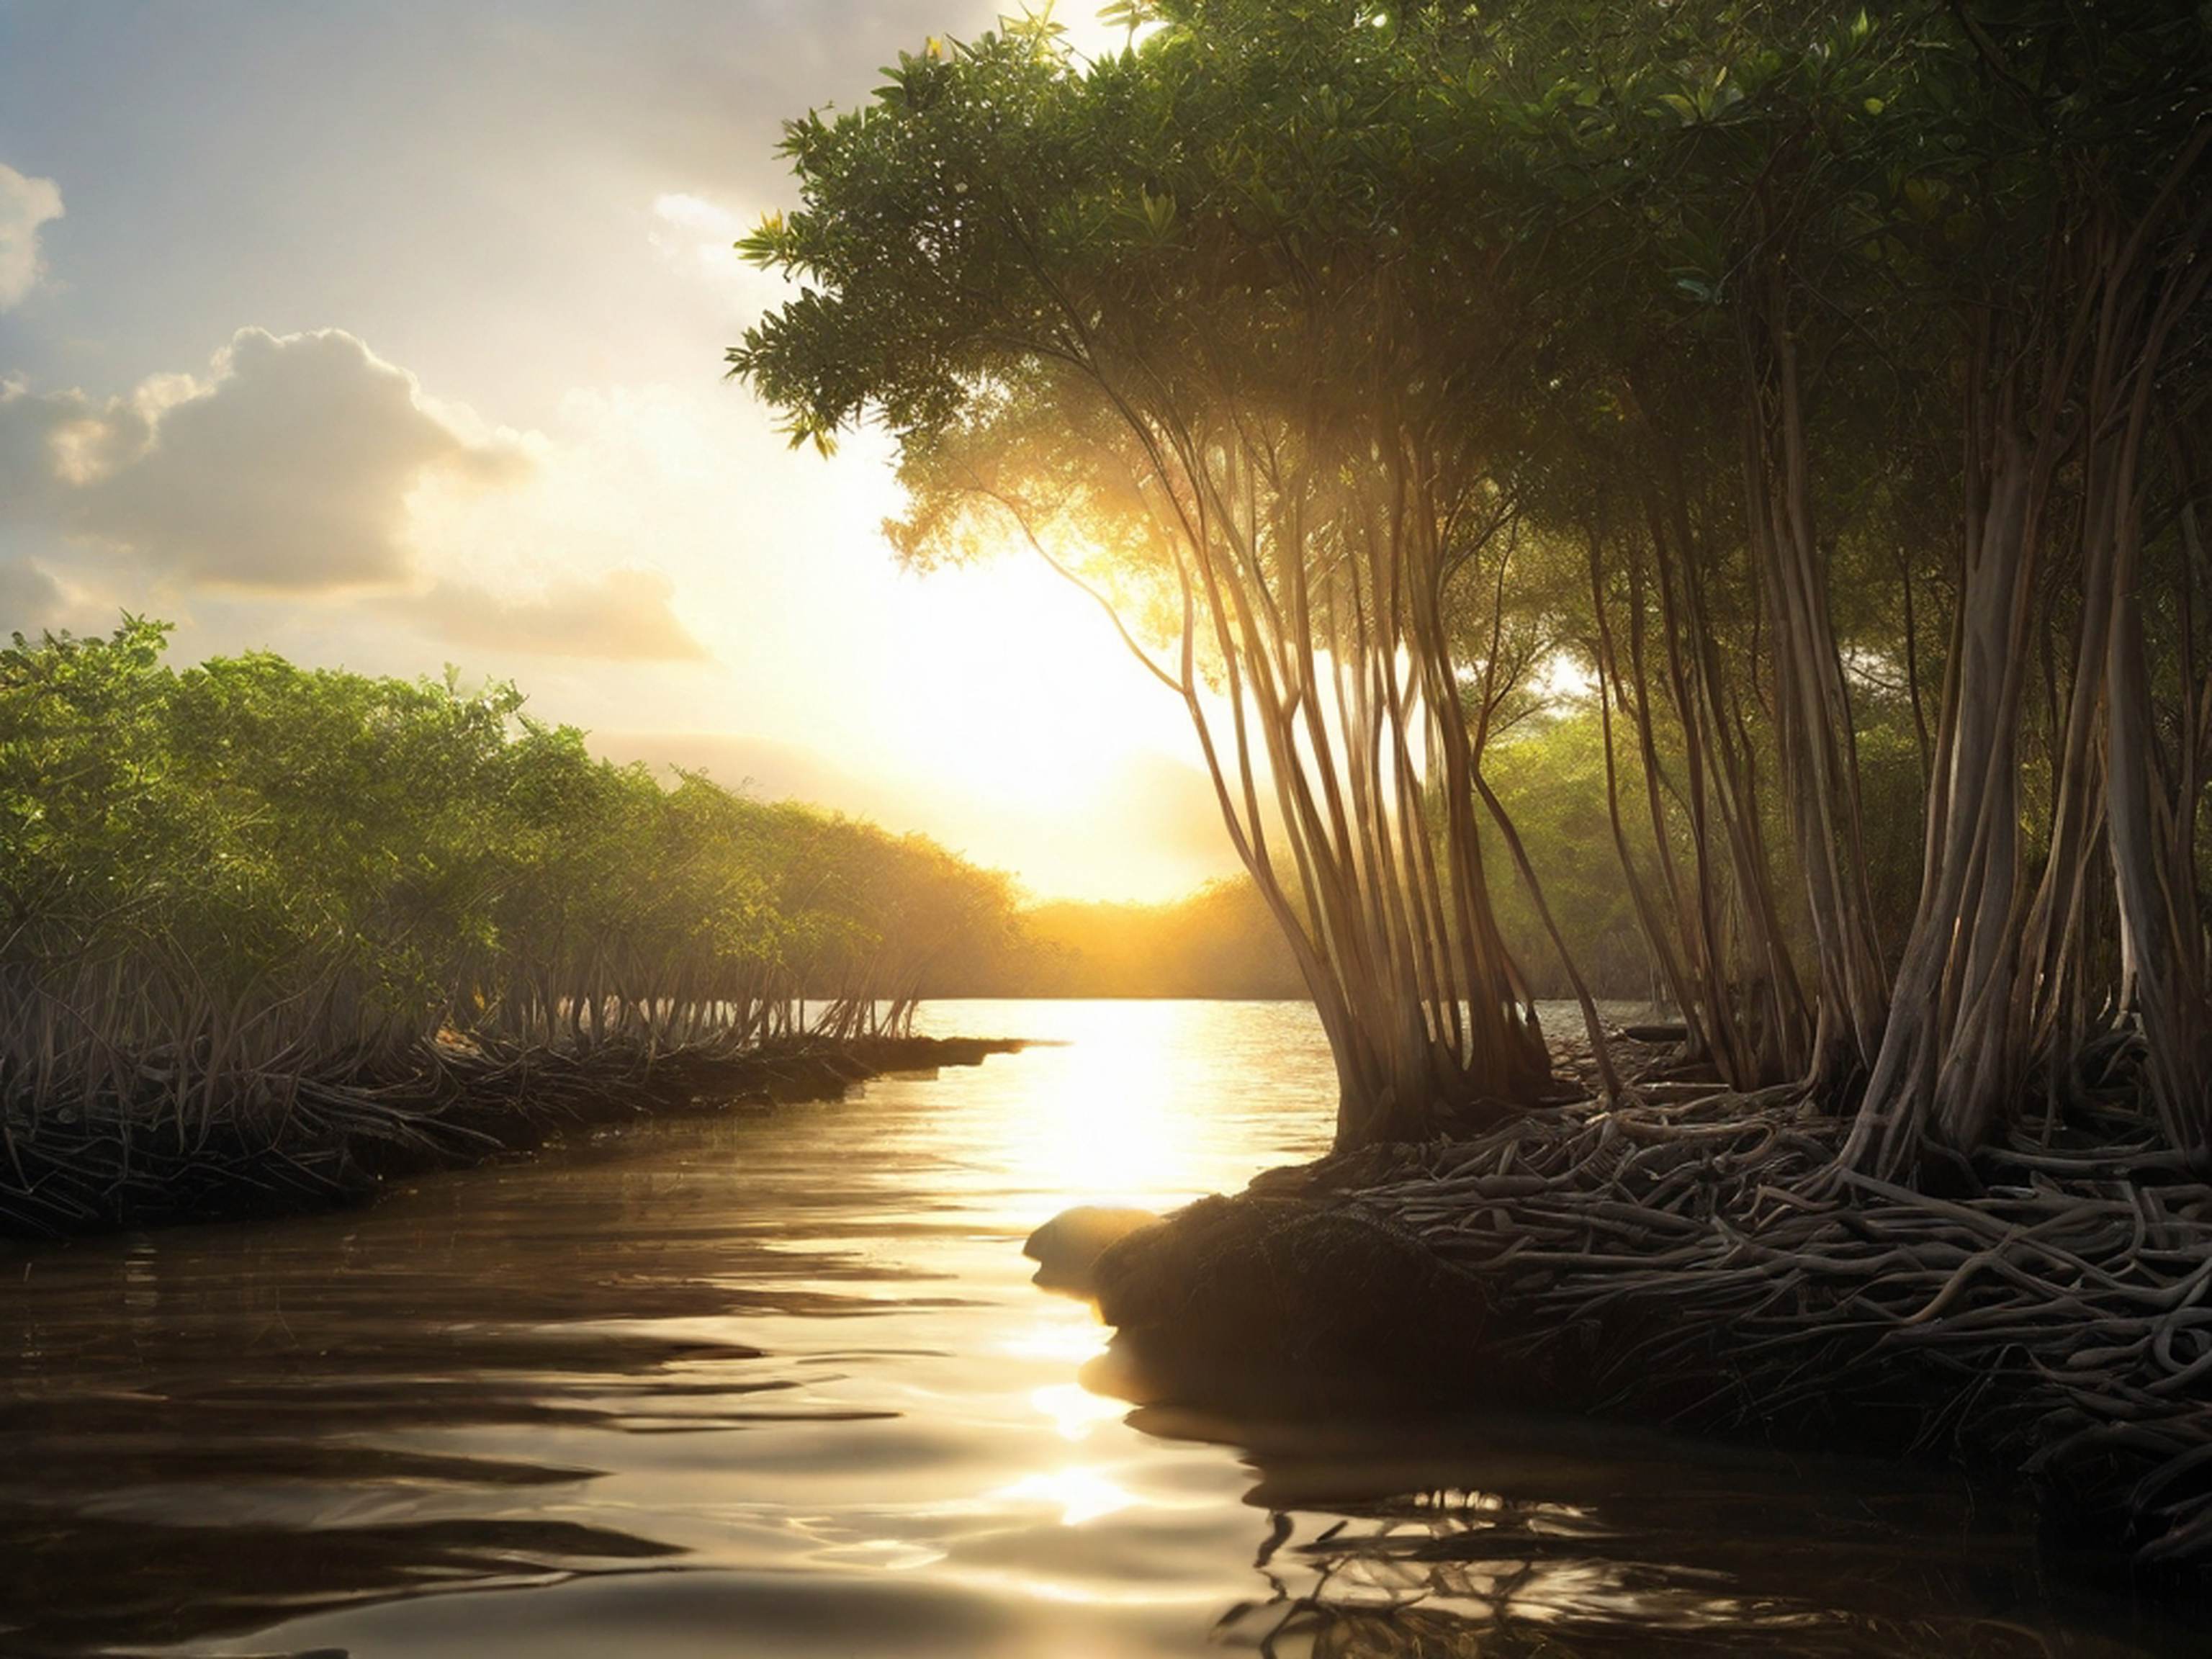 Nature's Detail: Sunrise Over Water and Mangrove